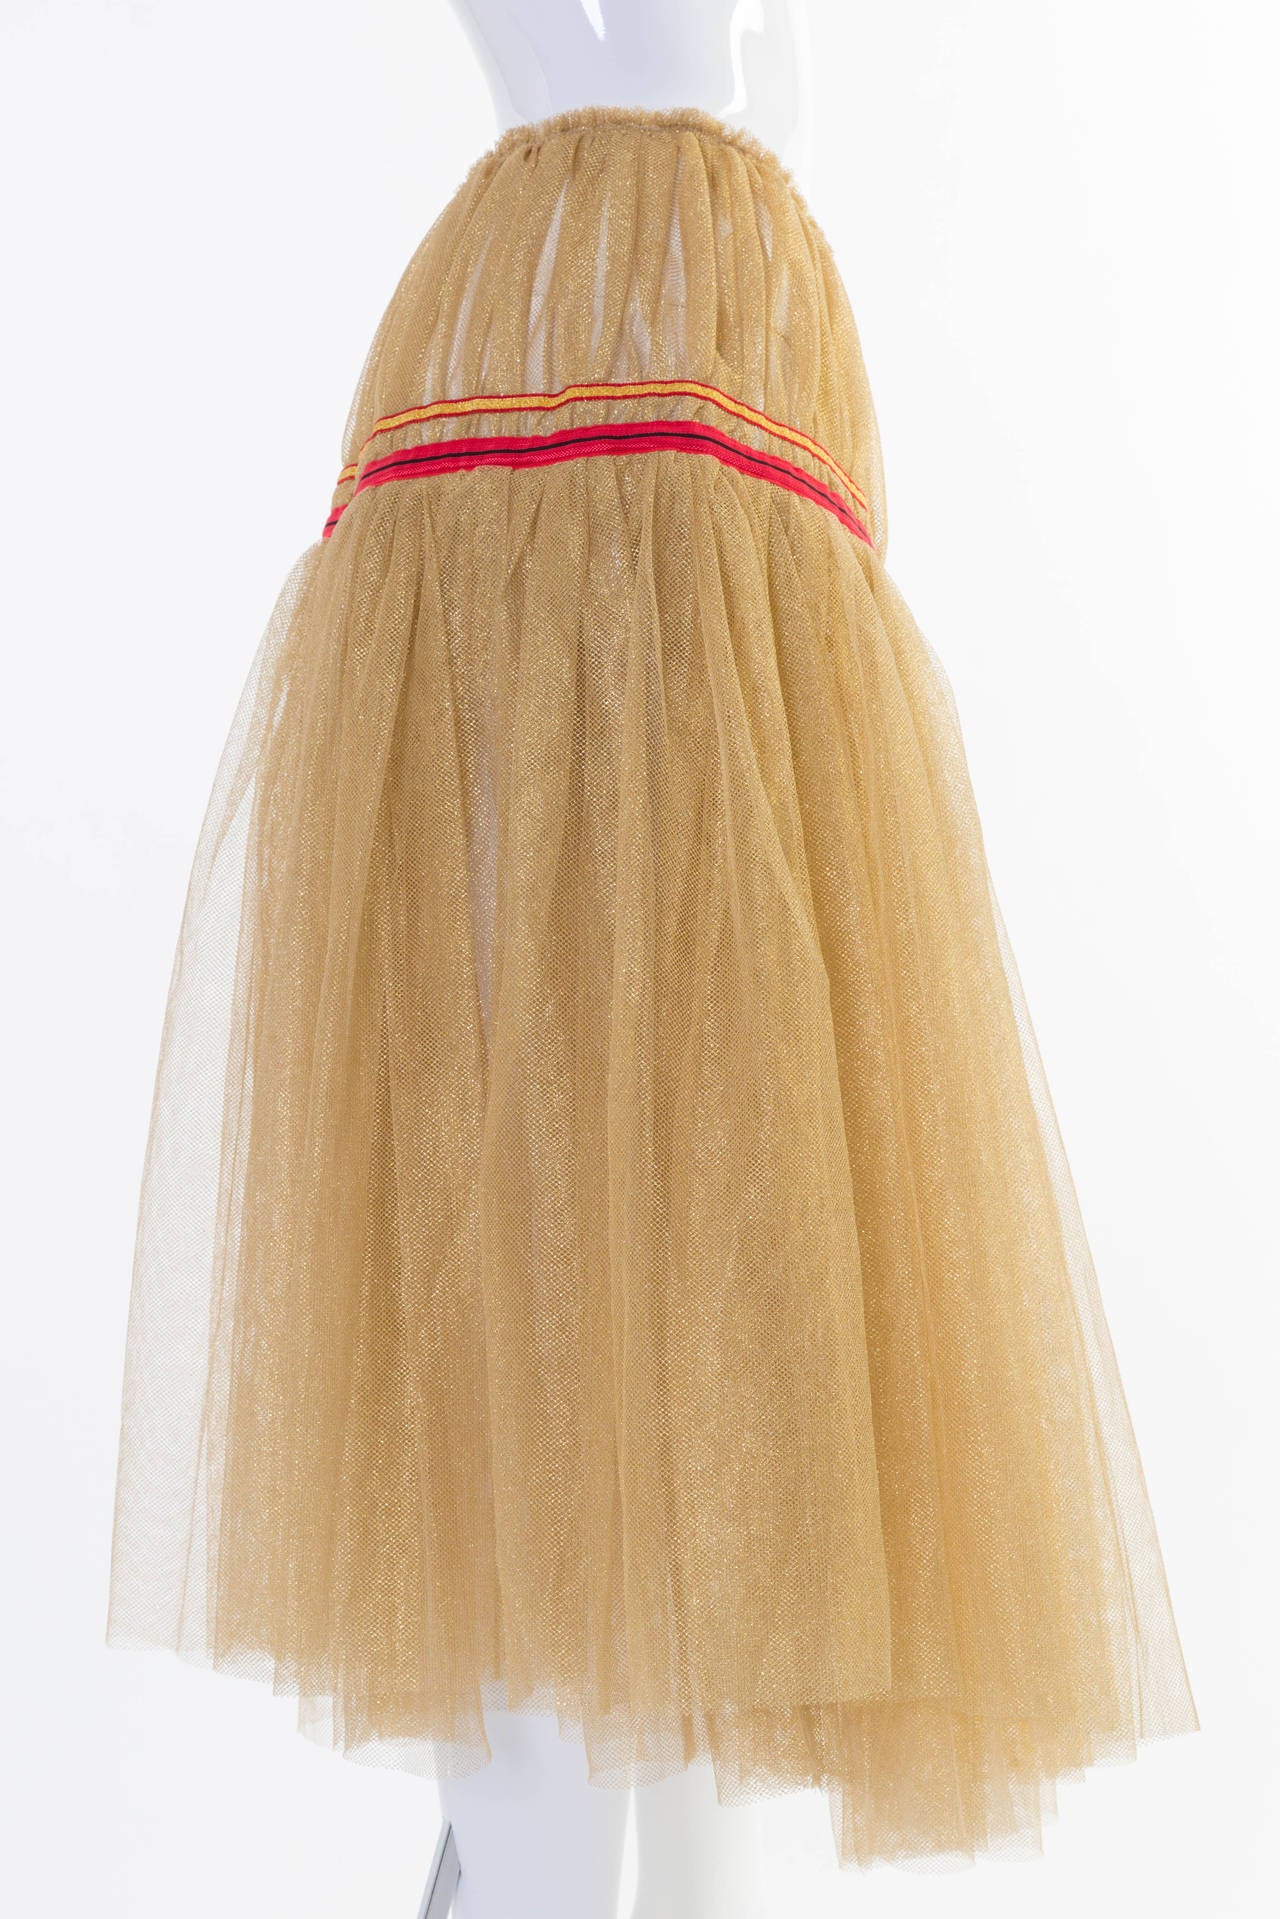 gold tulle skirts